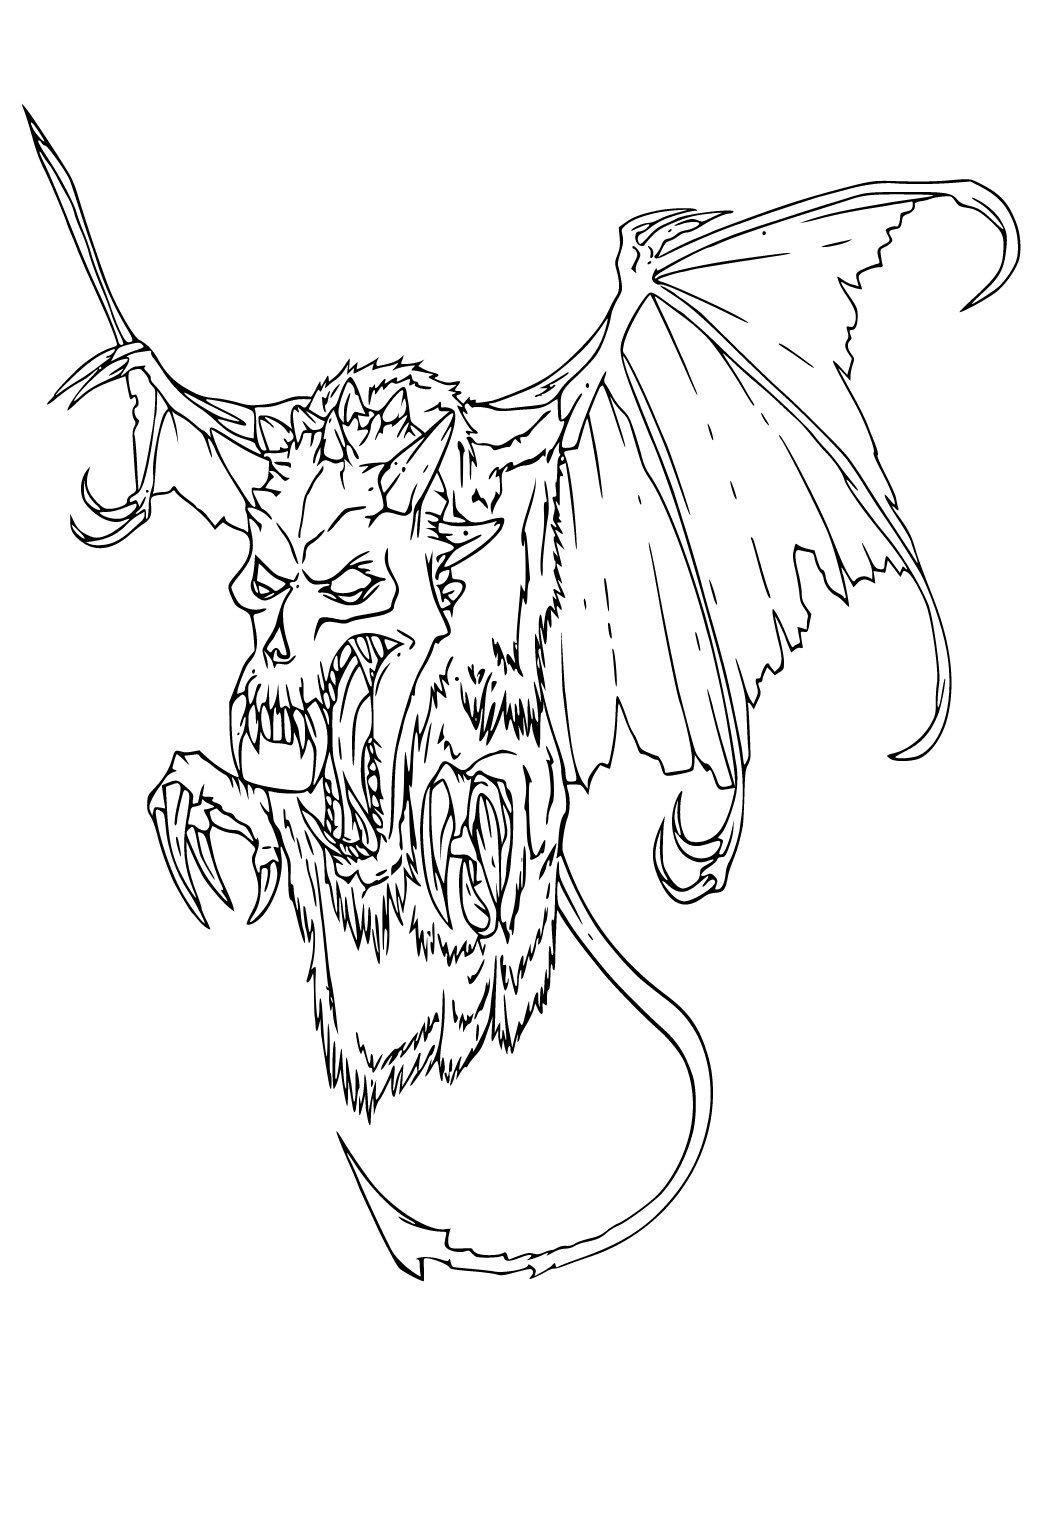 Free printable scary bat coloring page for adults and kids